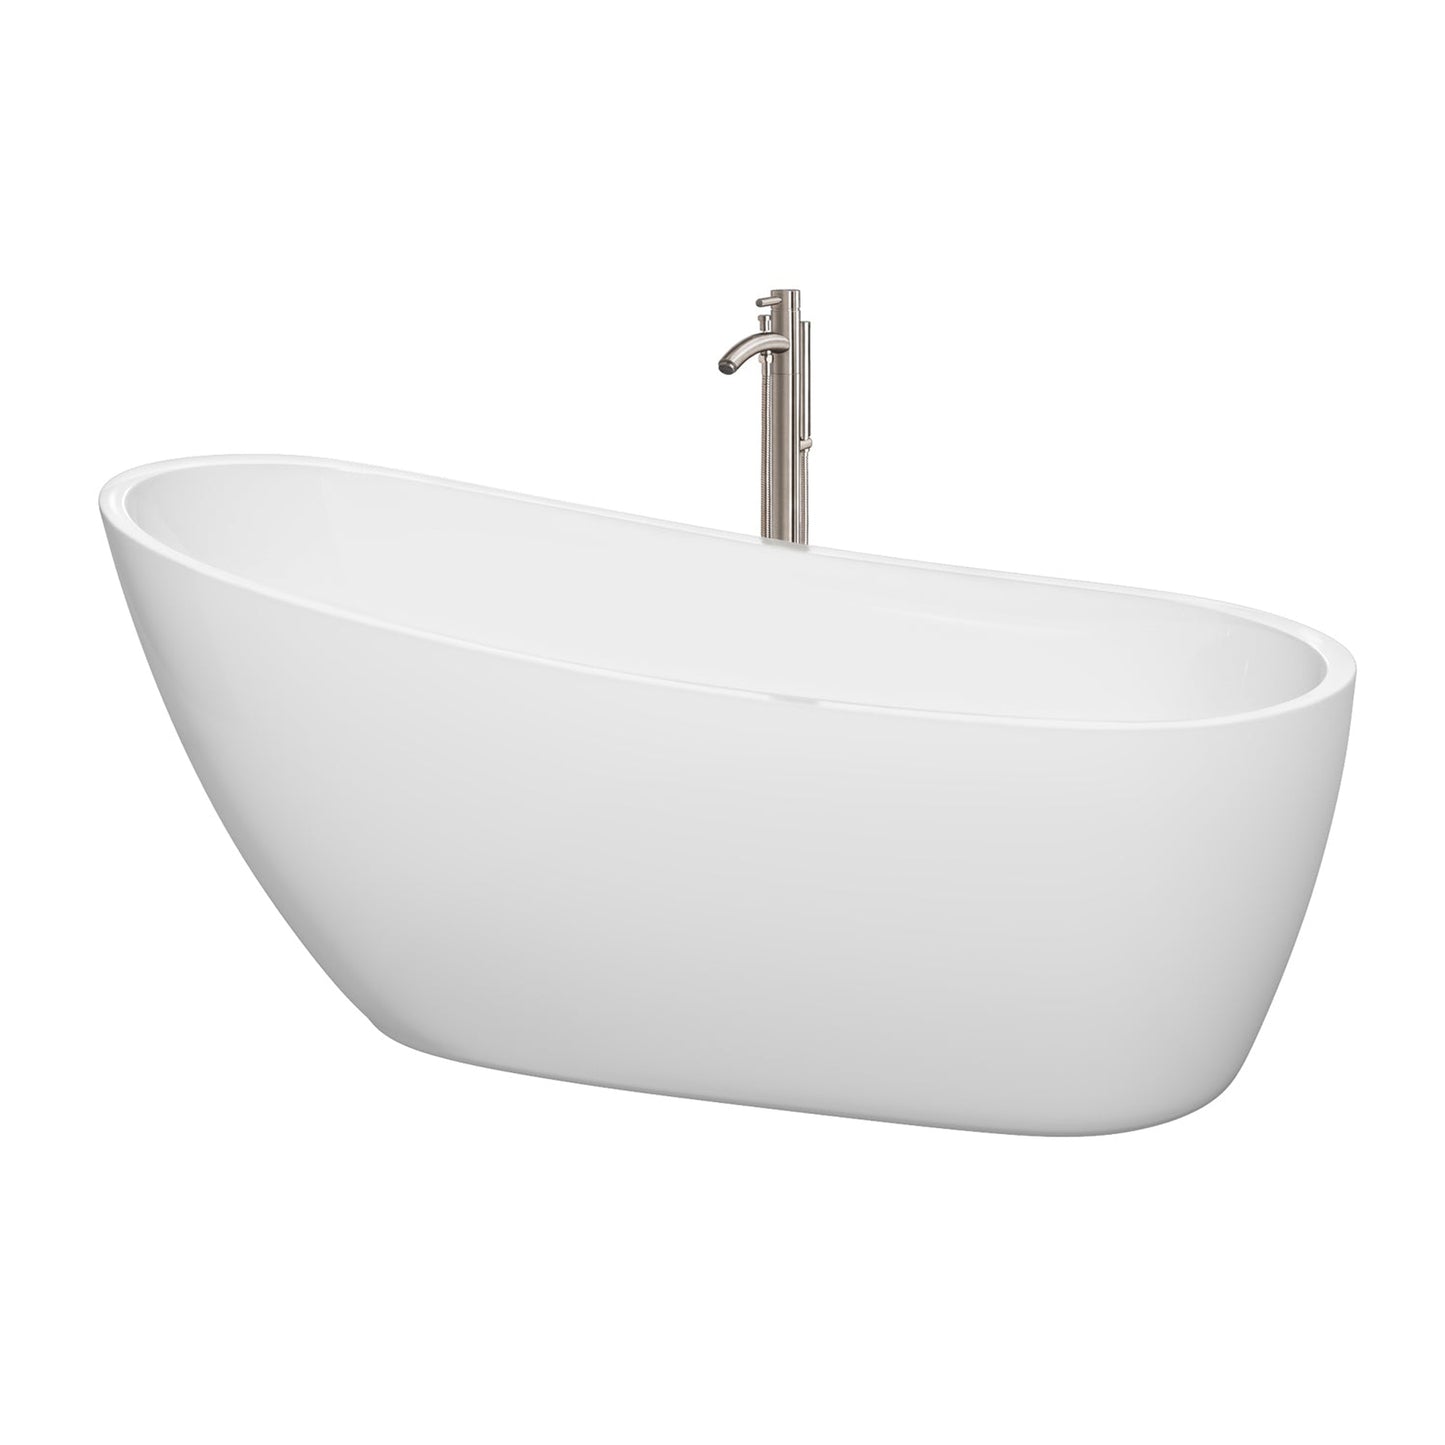 Wyndham Collection Florence 68" Freestanding Bathtub in White With Floor Mounted Faucet, Drain and Overflow Trim in Brushed Nickel